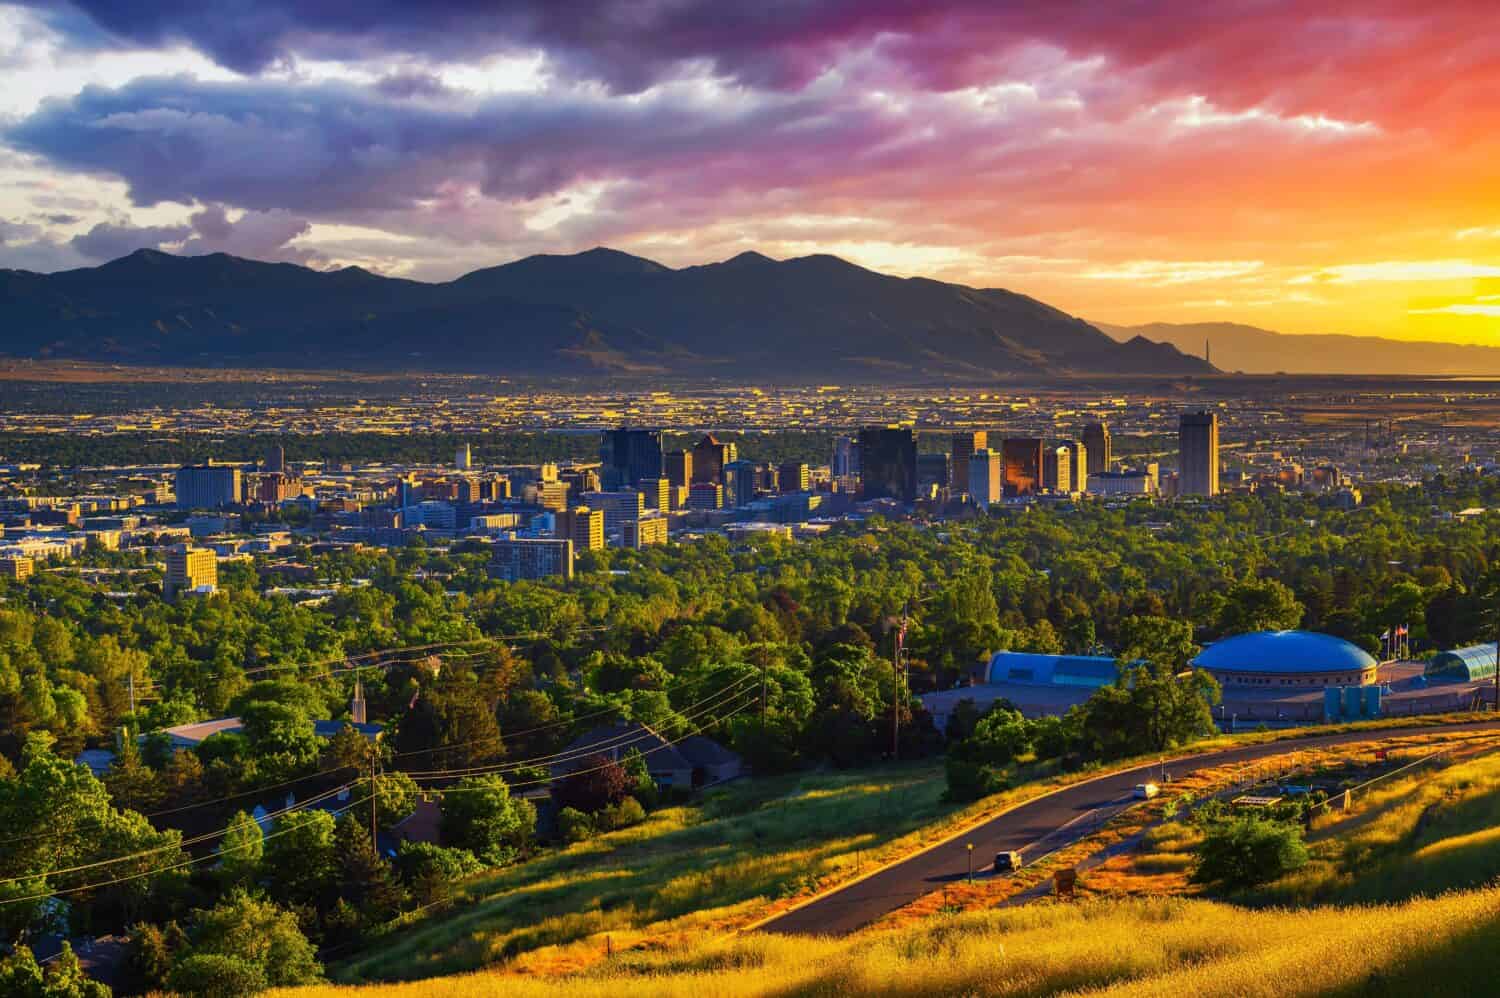 Salt Lake City skyline at sunset with Wasatch Mountains in the background, Utah, USA.